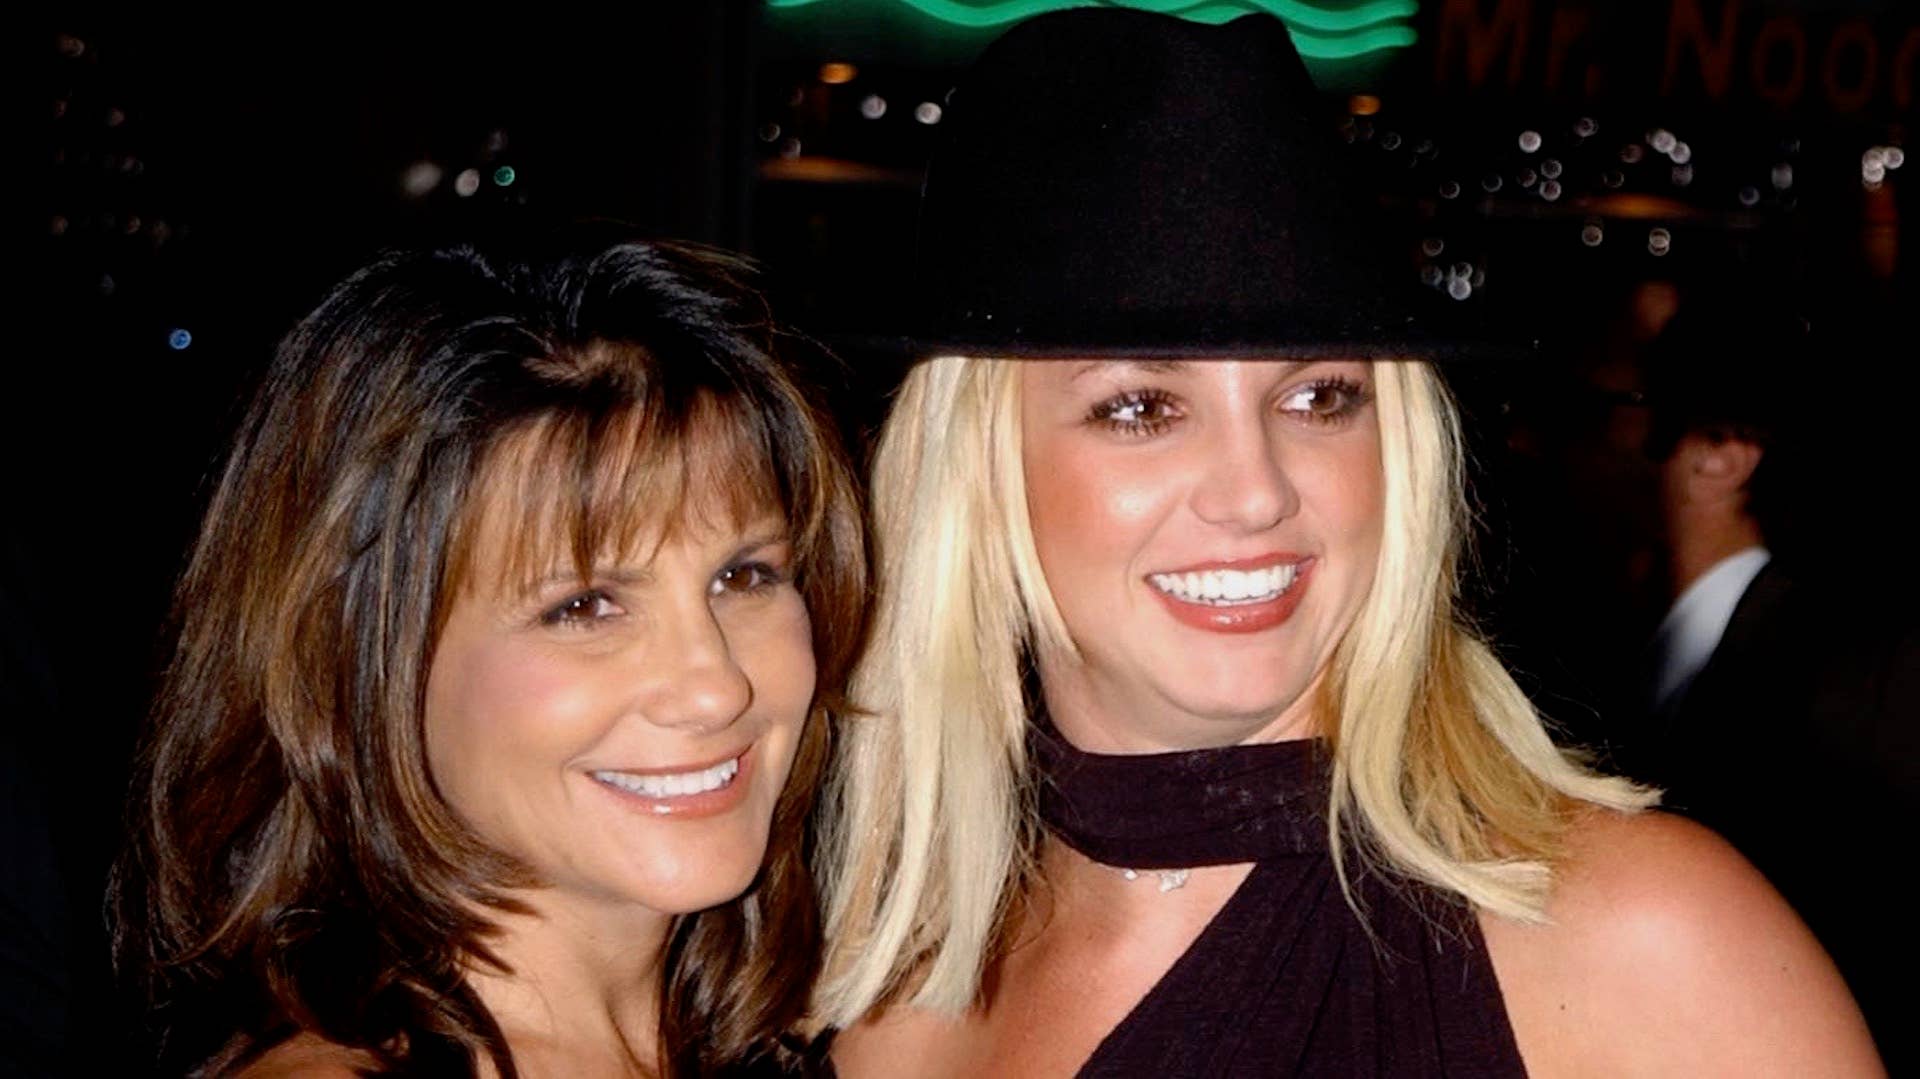 Lynne and Britney Spears